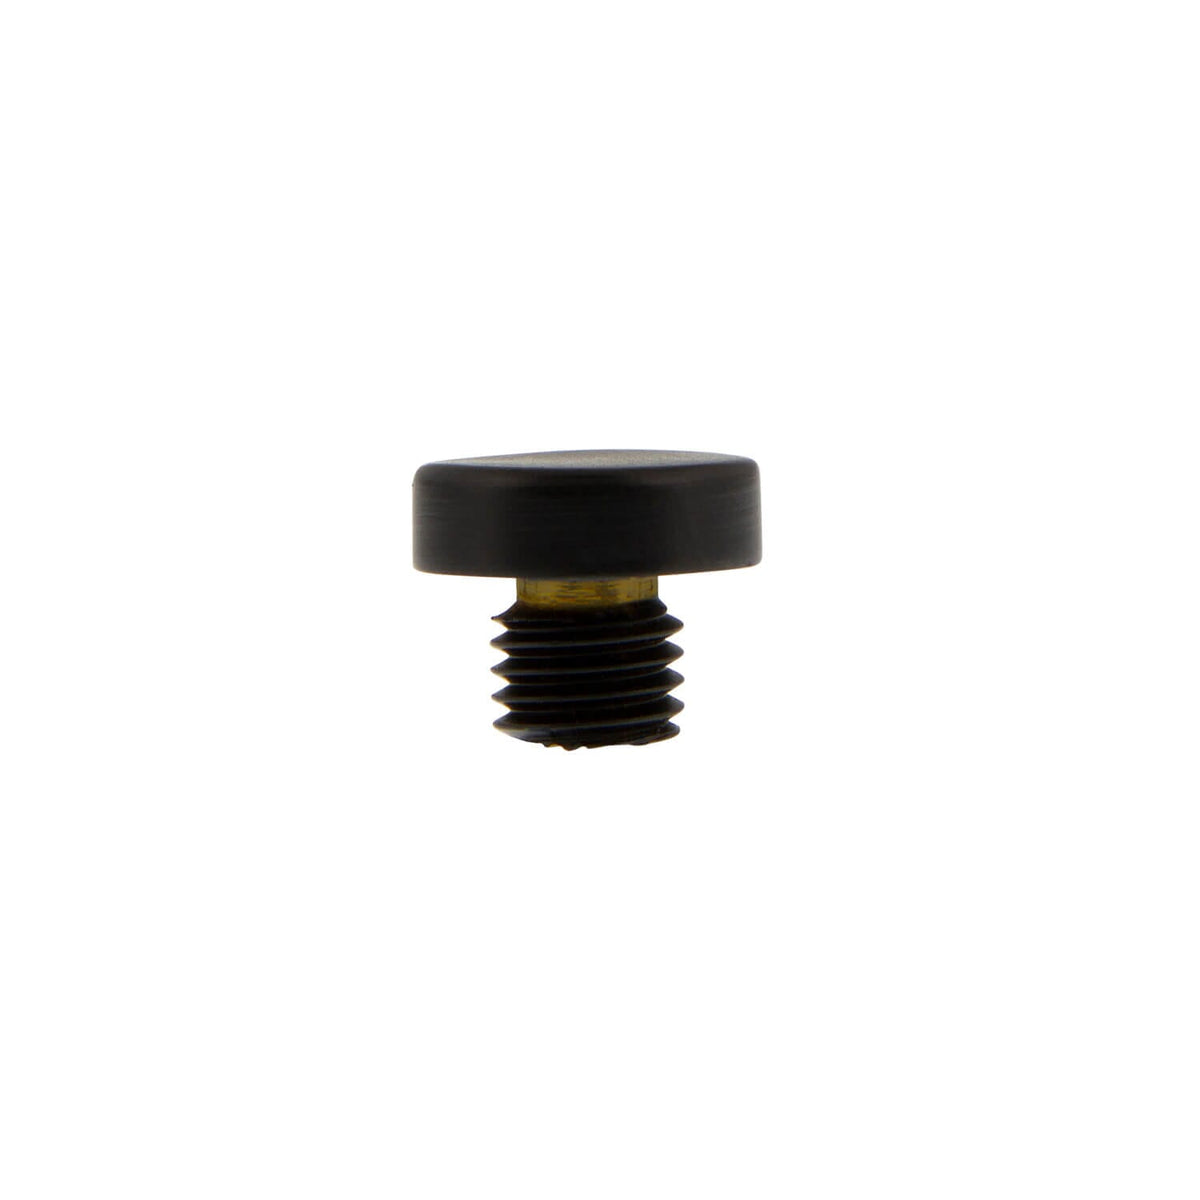 2.2mm Button Finial in Satin Black